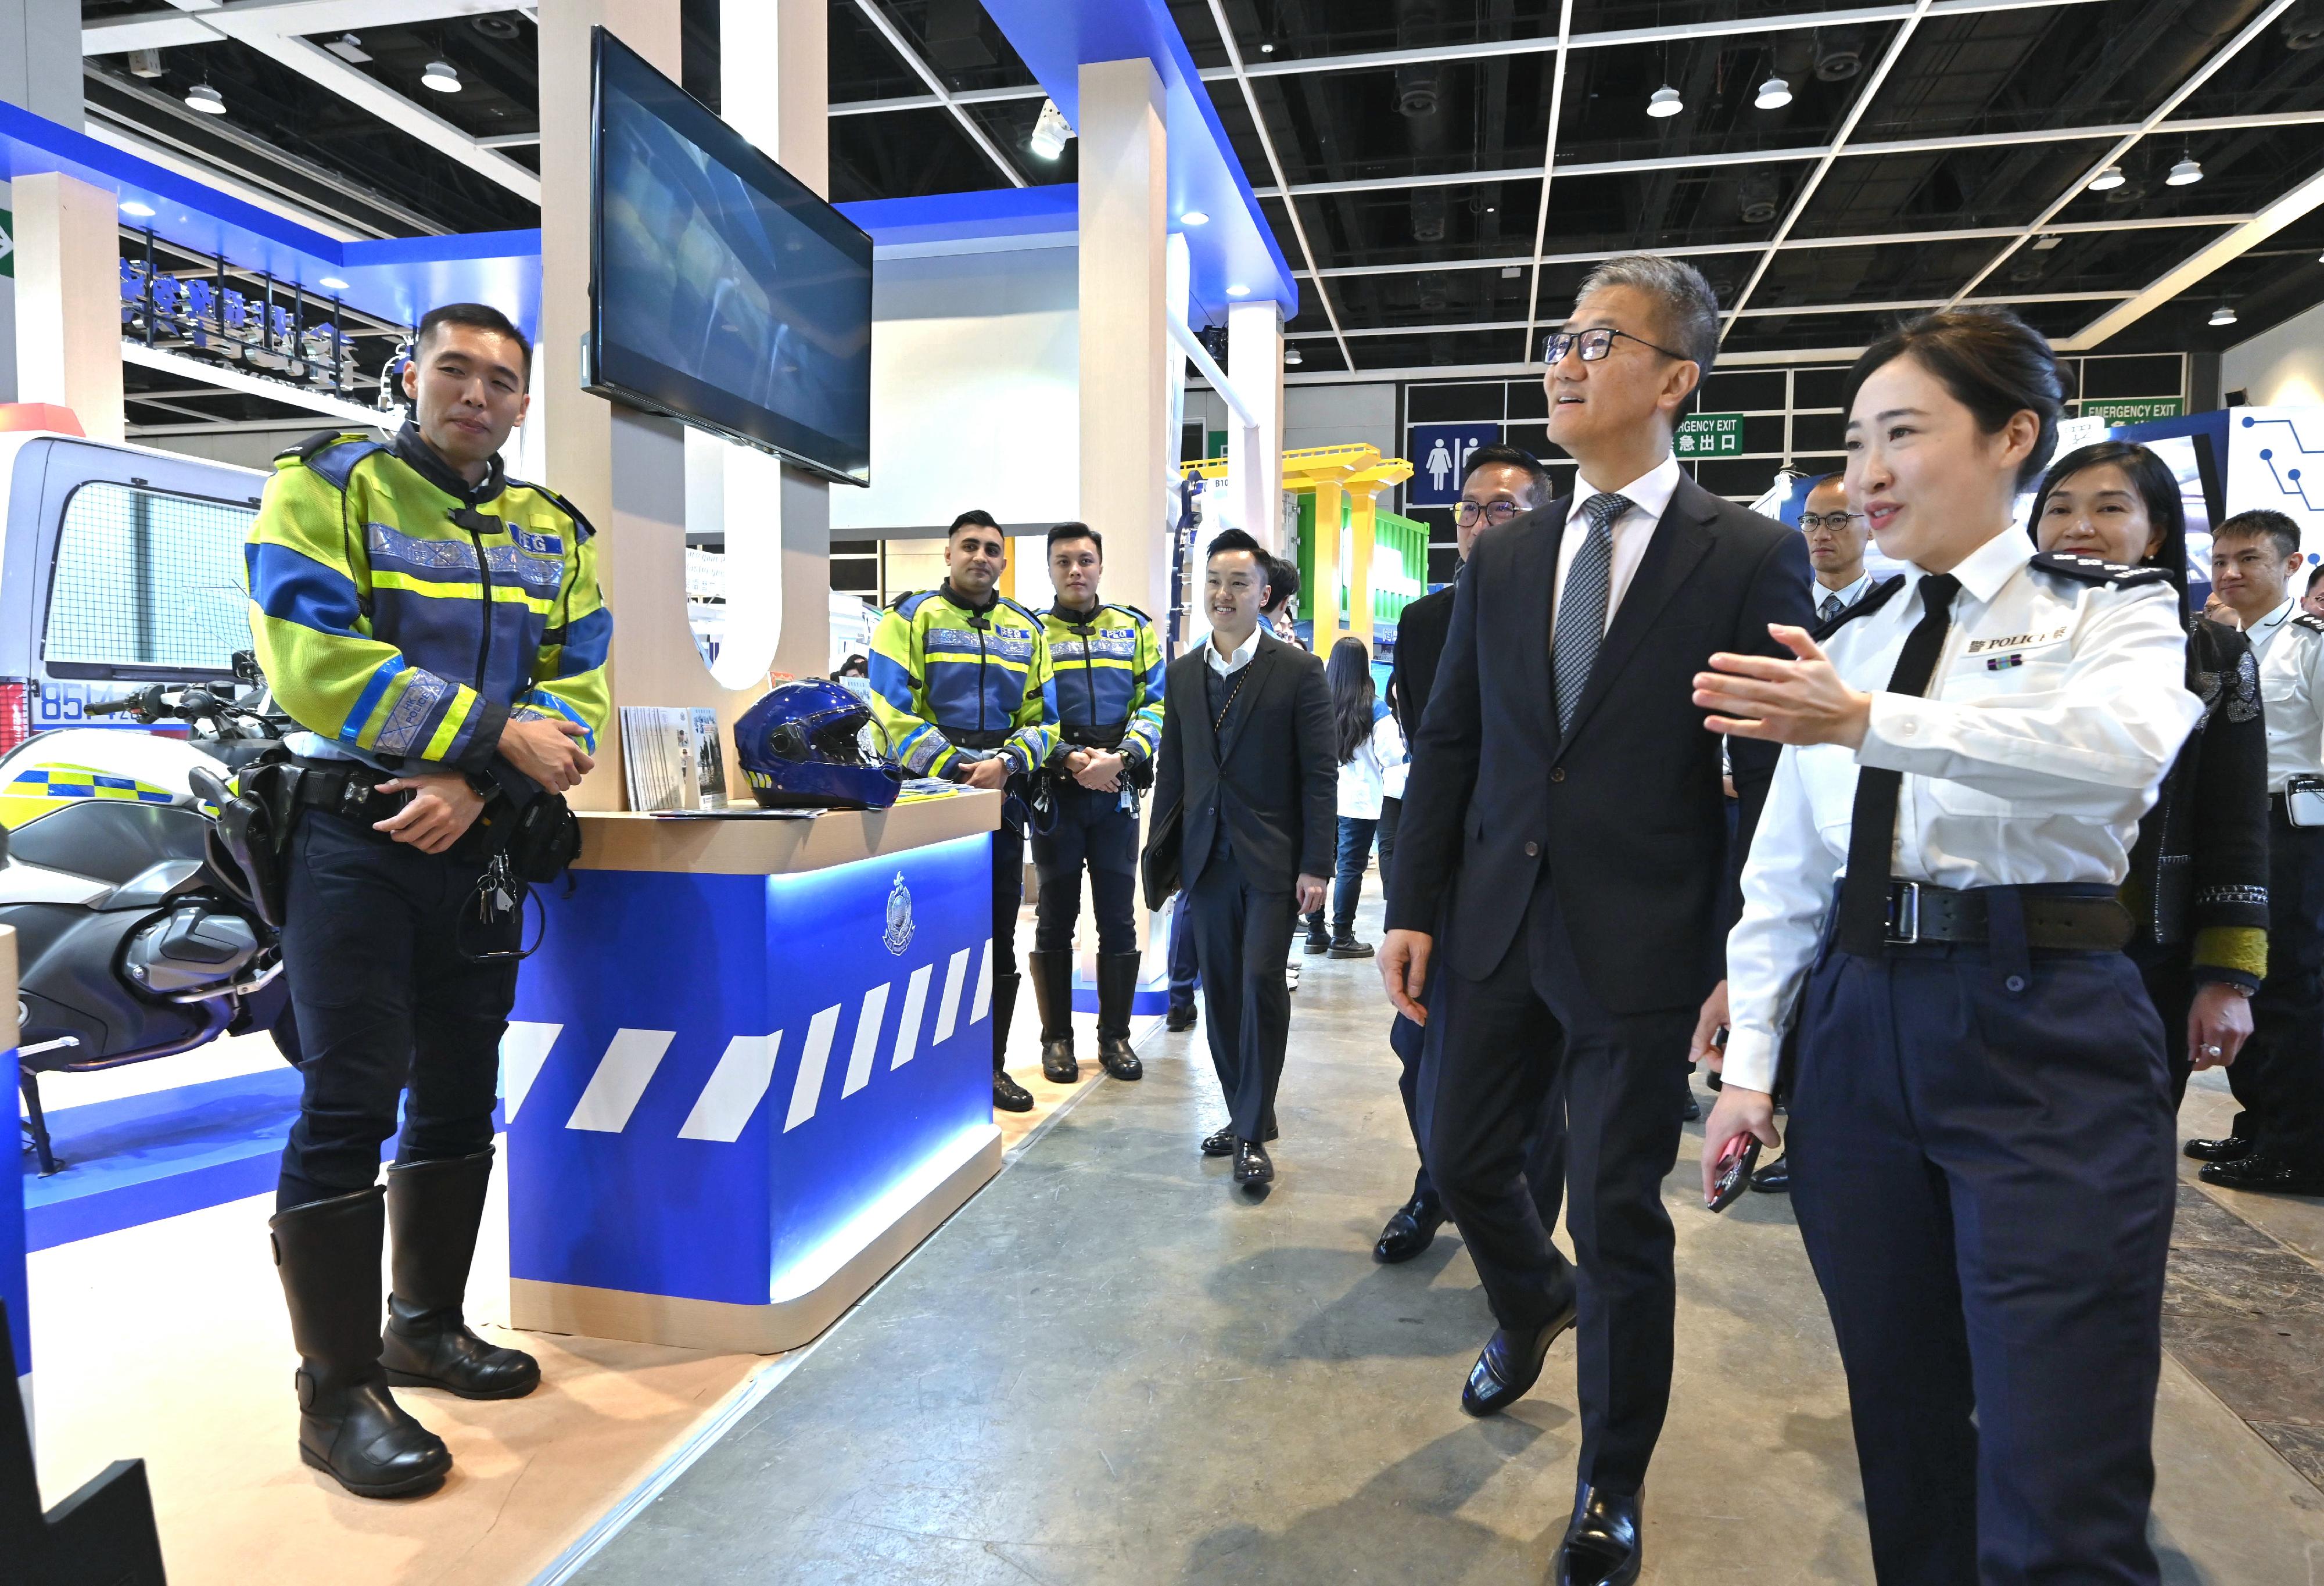 The Hong Kong Police Force introduces its work and provides recruitment information to visitors at the Education and Careers Expo 2024 for four consecutive days from today (January 25). Photo shows the Commissioner of Police, Mr Siu Chak-yee (front row, second right), touring the Police recruitment booth, where he received a briefing on the recruitment work.